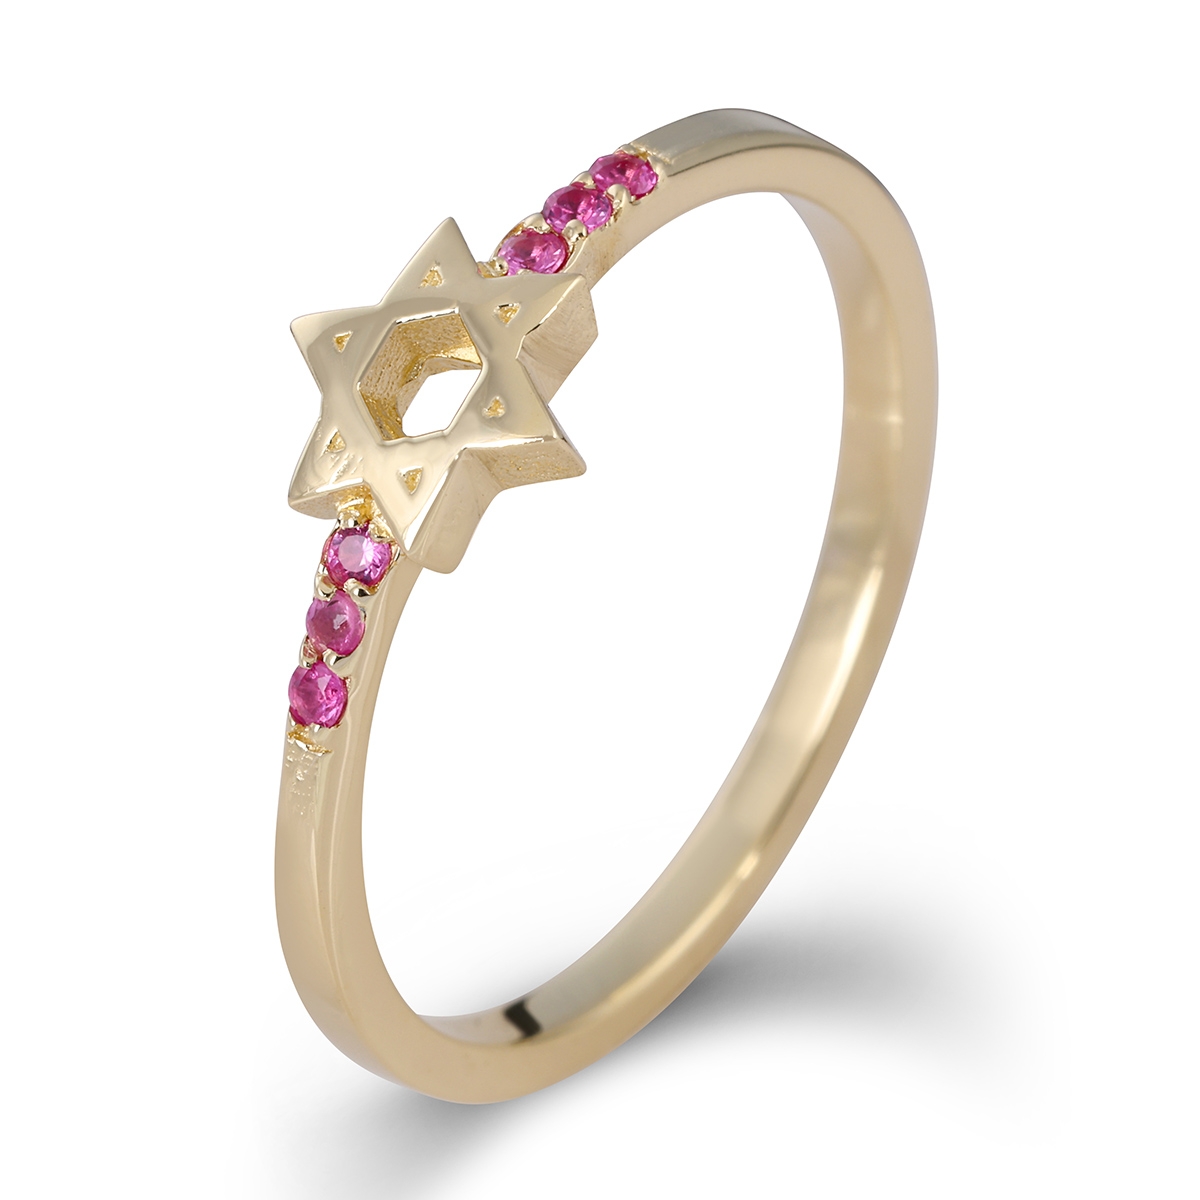 Star of David 14K Yellow Gold Ring With Ruby Stones - 1